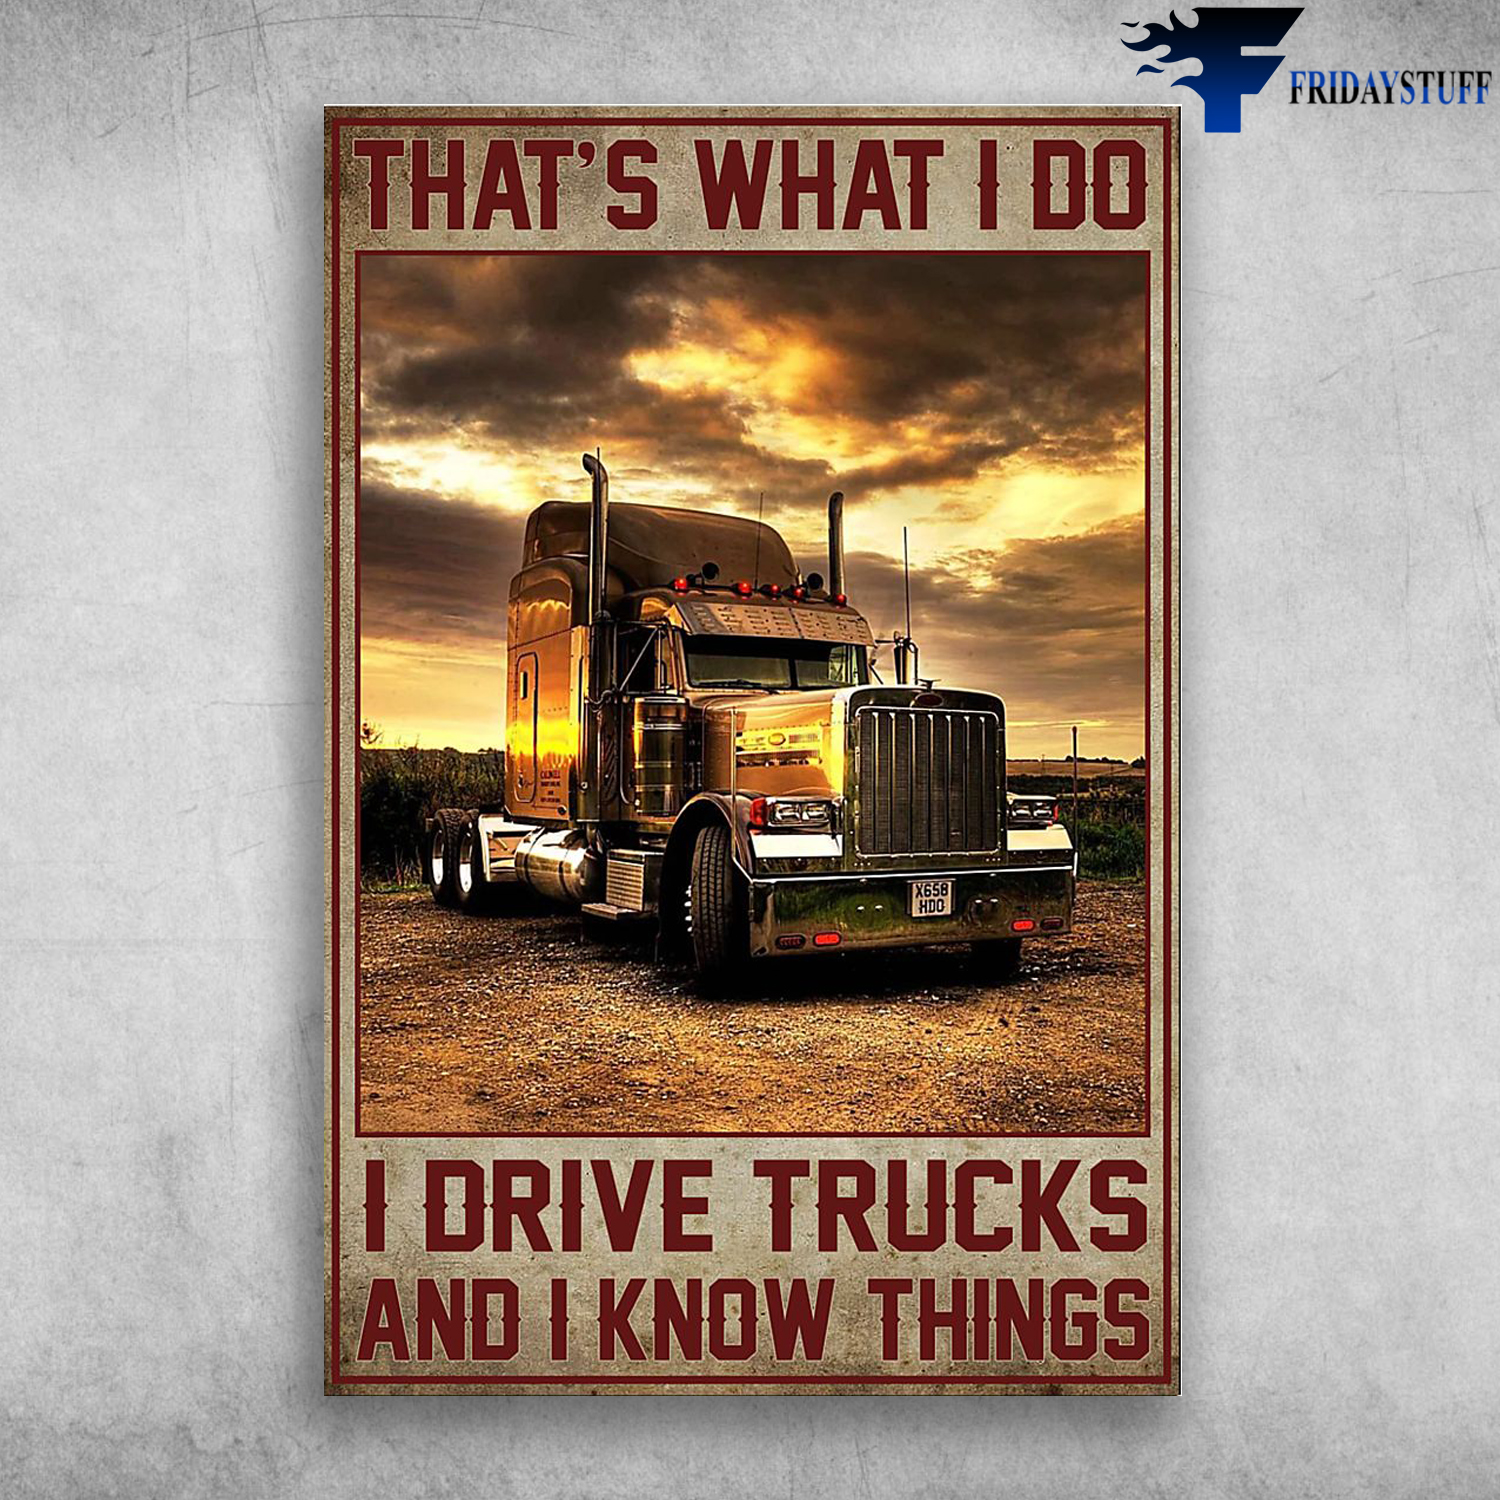 The Trucks - That's What I Do, I Drive Trucks And I Know Things